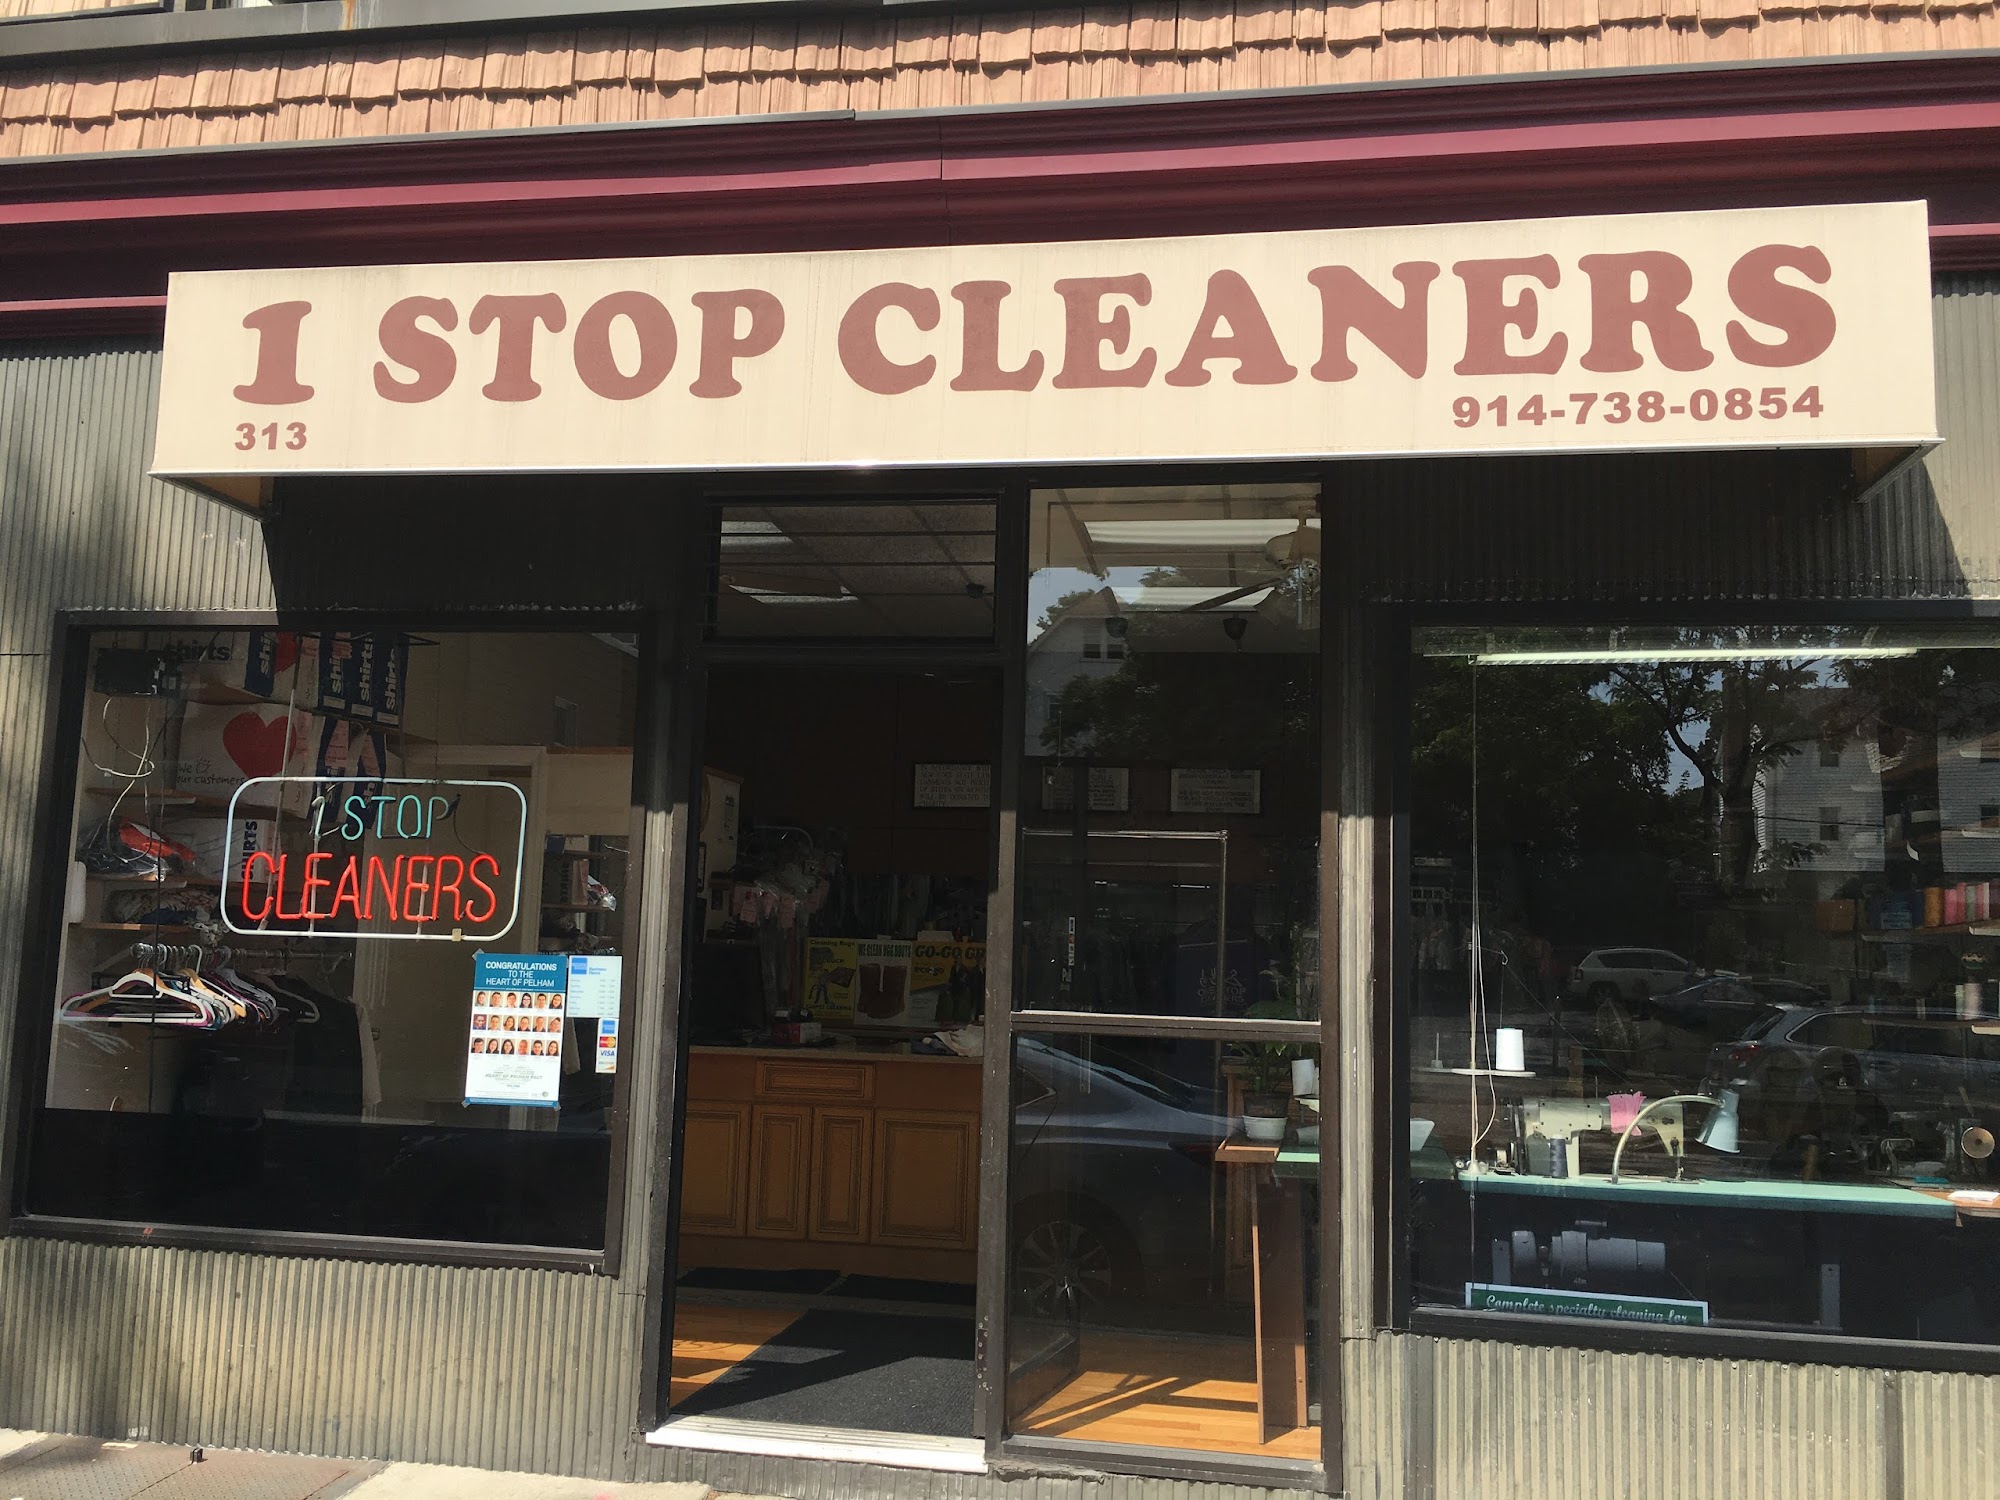 One Stop Son Cleaners 313 Fifth Ave, Village of Pelham New York 10803